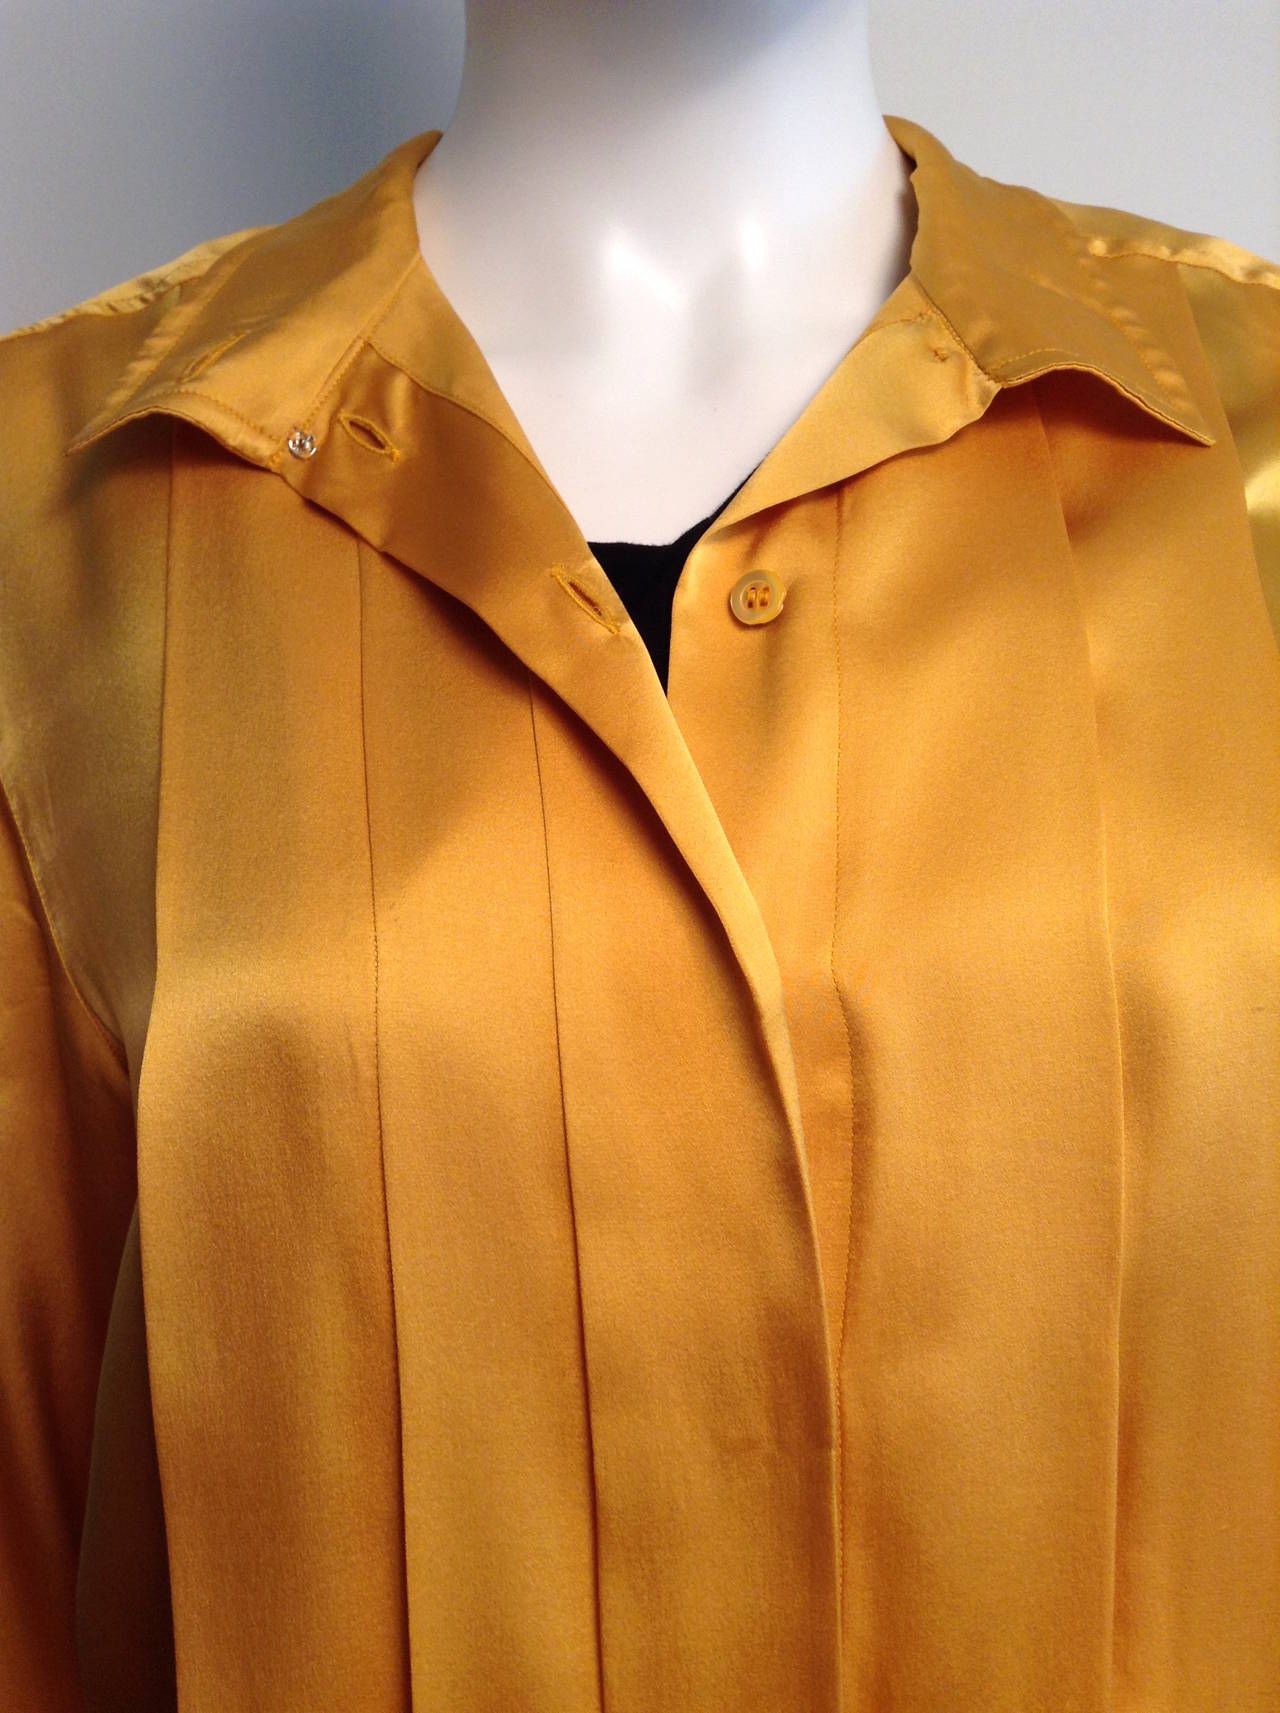 Chanel Vintage Yellow Silk Blouse Size L For Sale 6